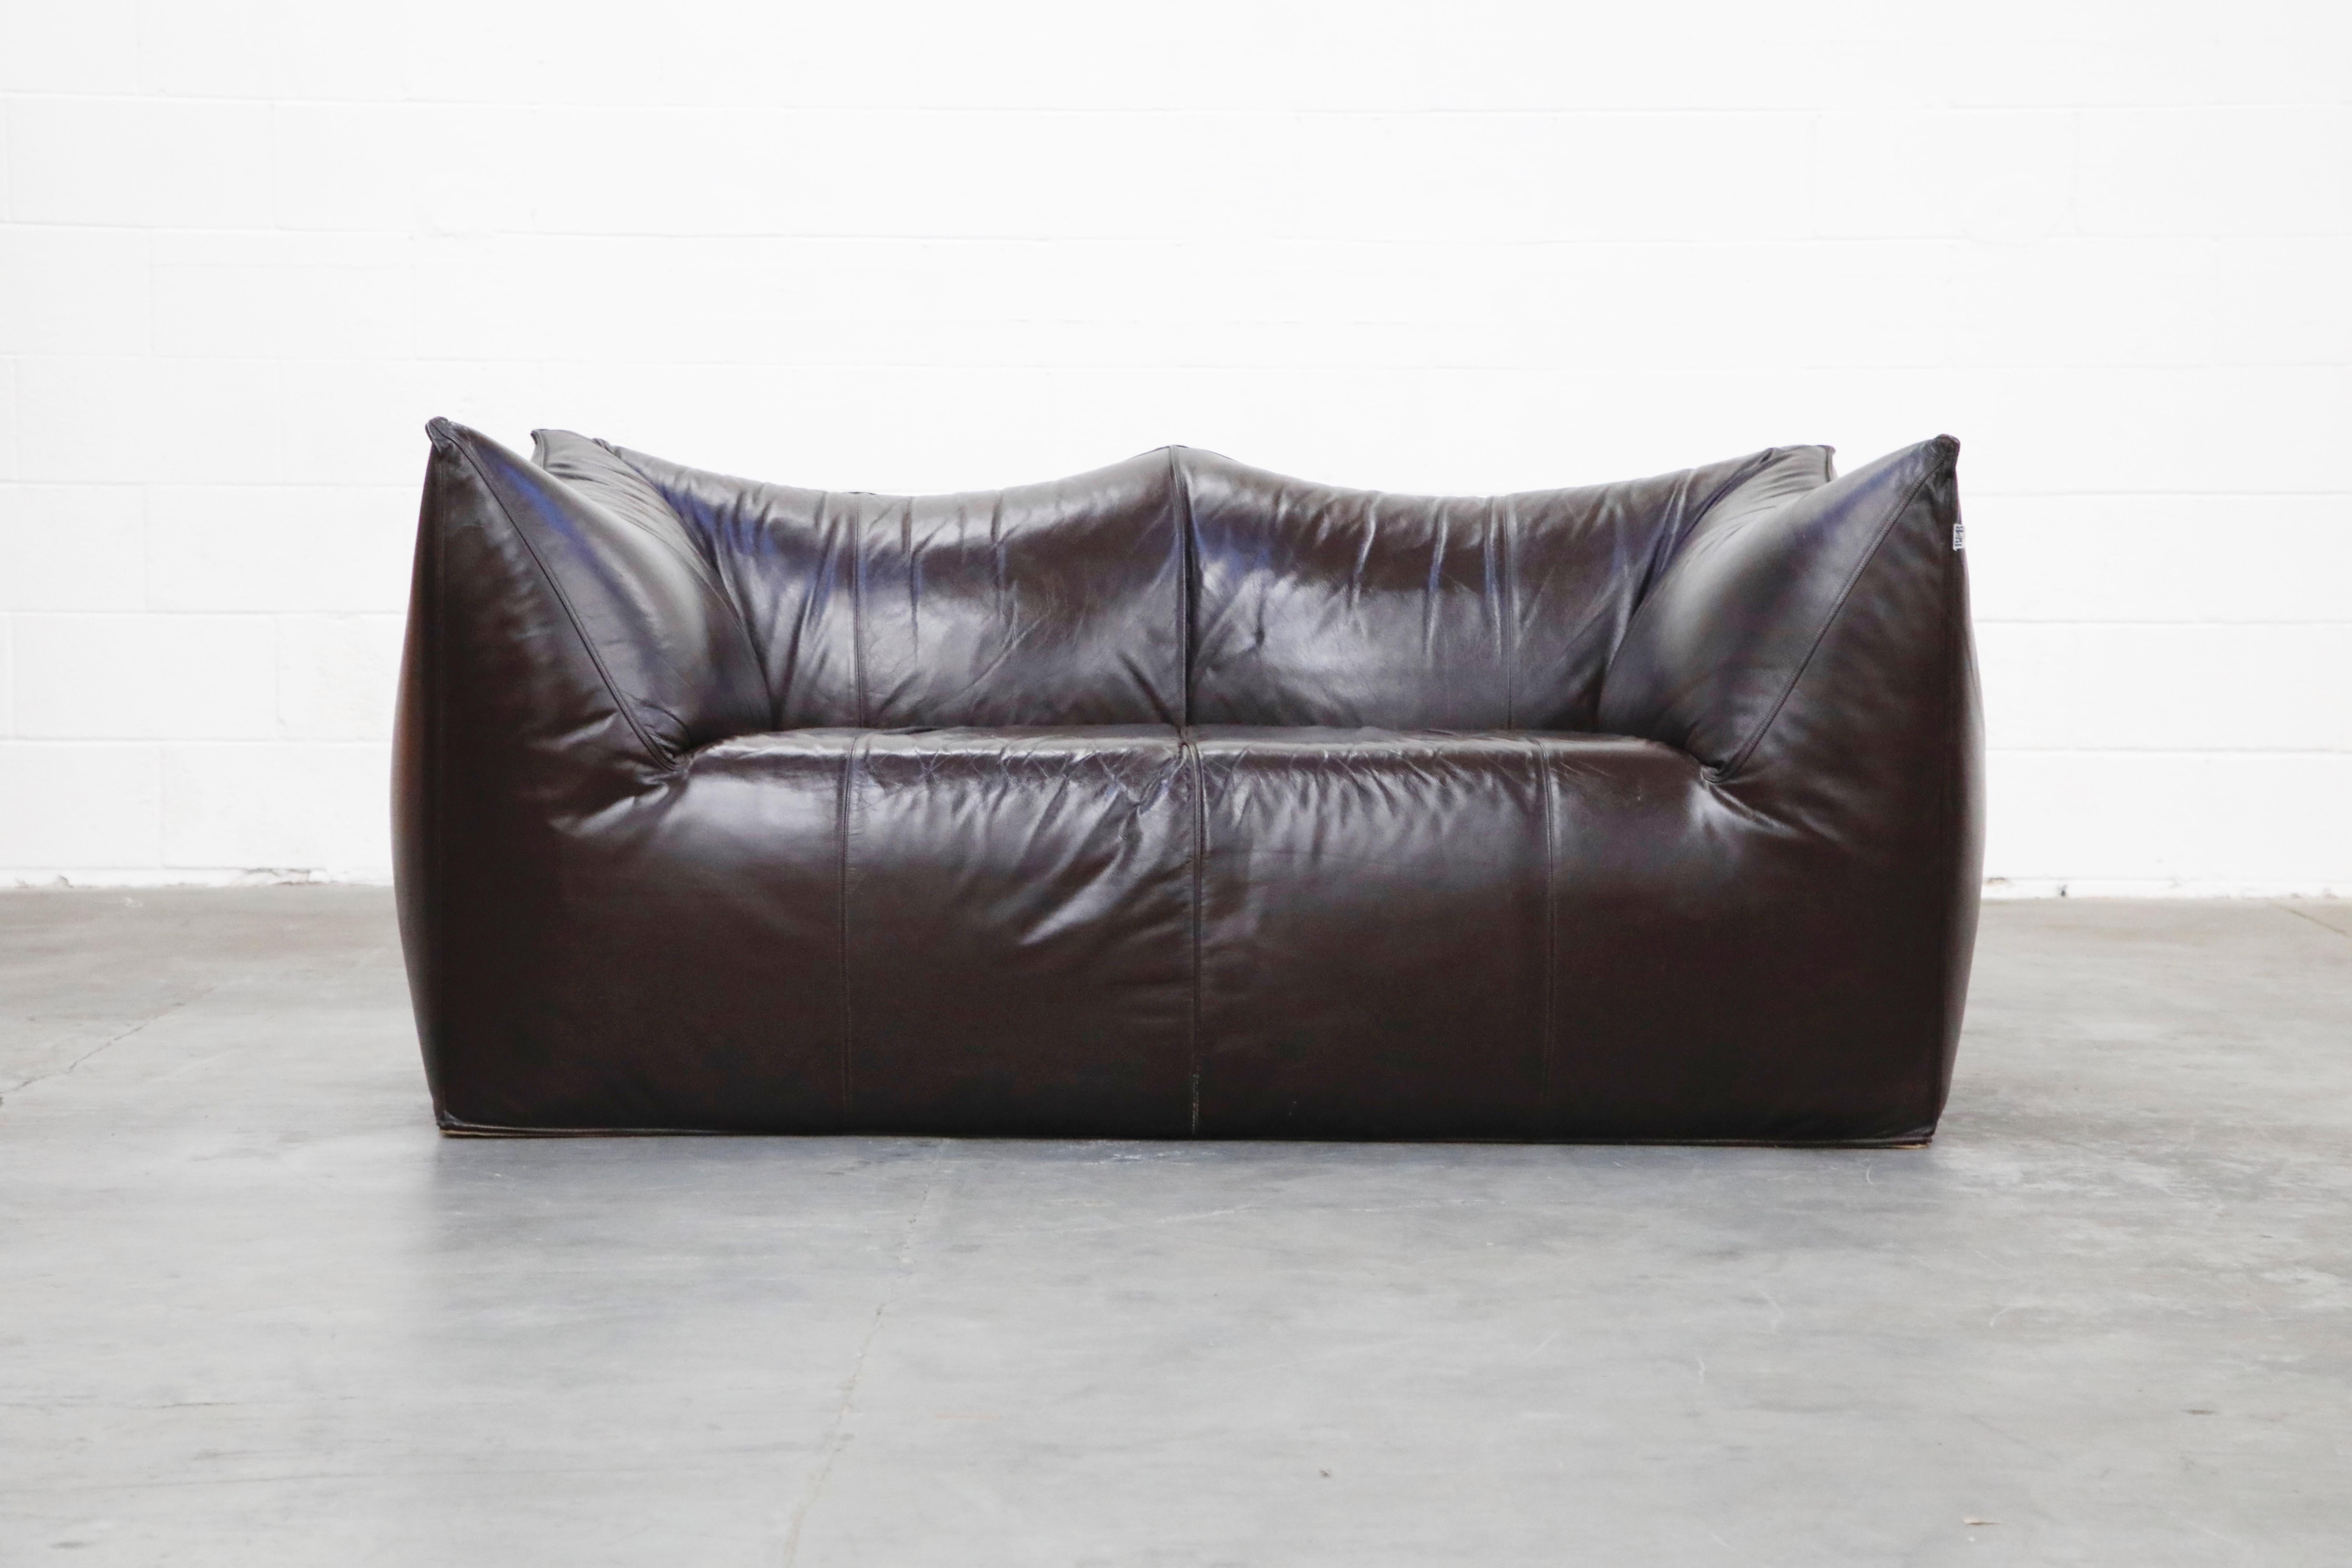 This incredible 'Le Bambole' loveseat by Mario Bellini for B&B Italia has thick gorgeous dark brown hide leather. The color is a dark deep brown that it looks black in lower light settings and beautiful dark brown in brighter settings. Designed in